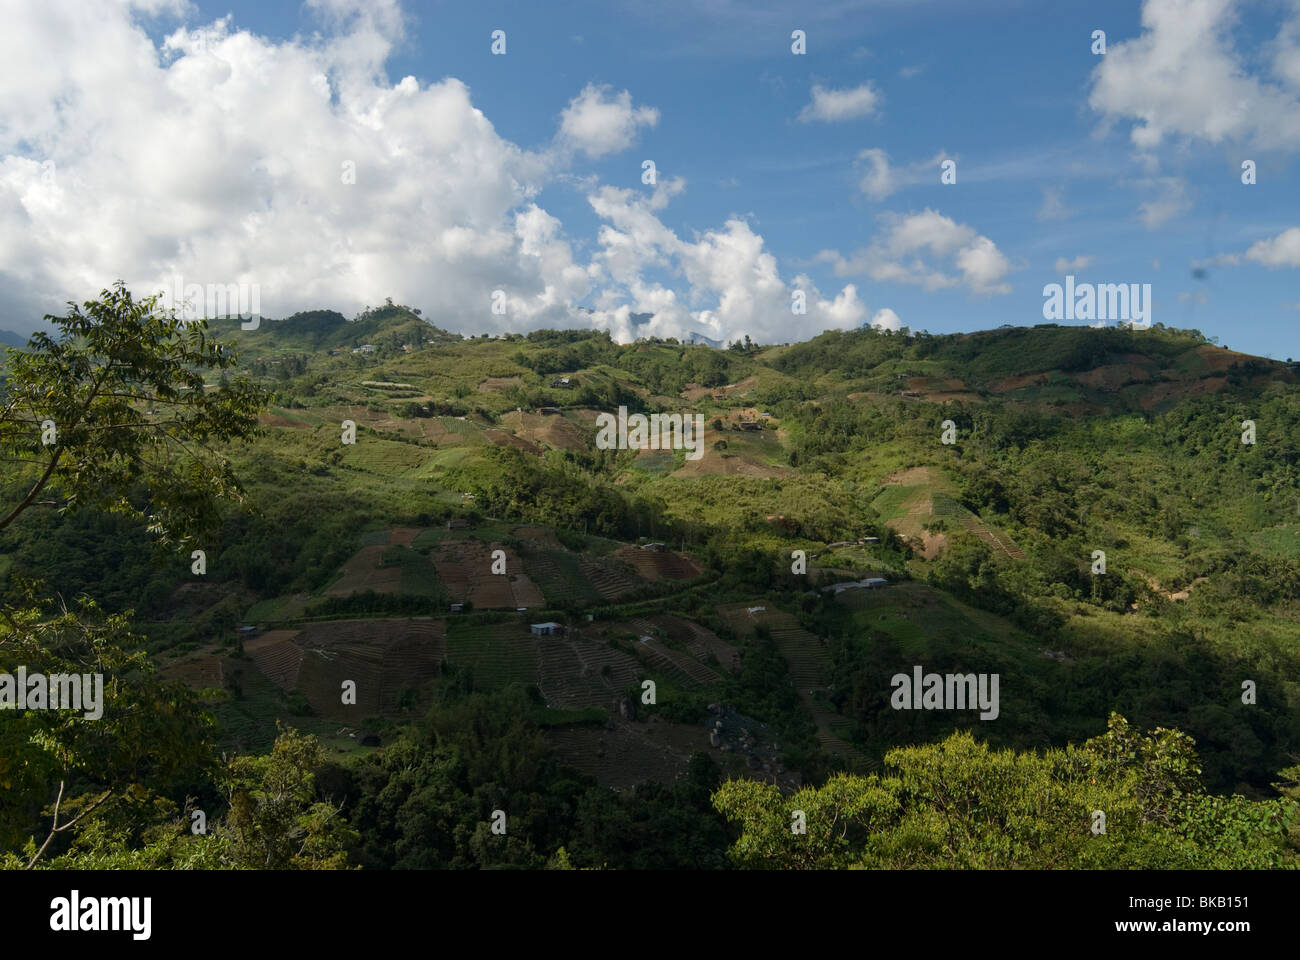 Small scale crop farms on hill side, Sabah, Borneo, East Malaysia. Stock Photo